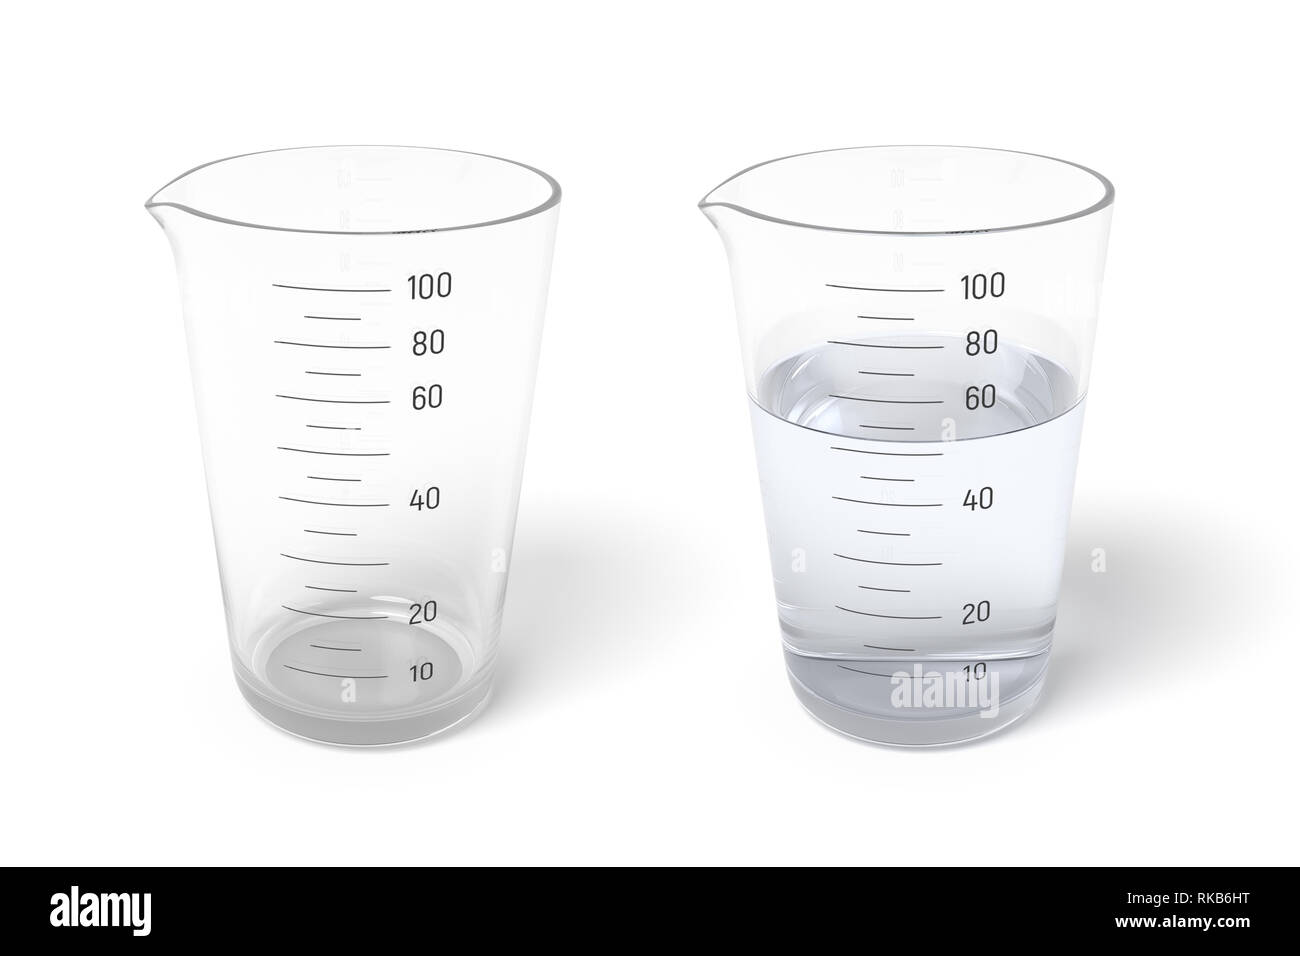 60+ Half Filled Measuring Cup Stock Photos, Pictures & Royalty